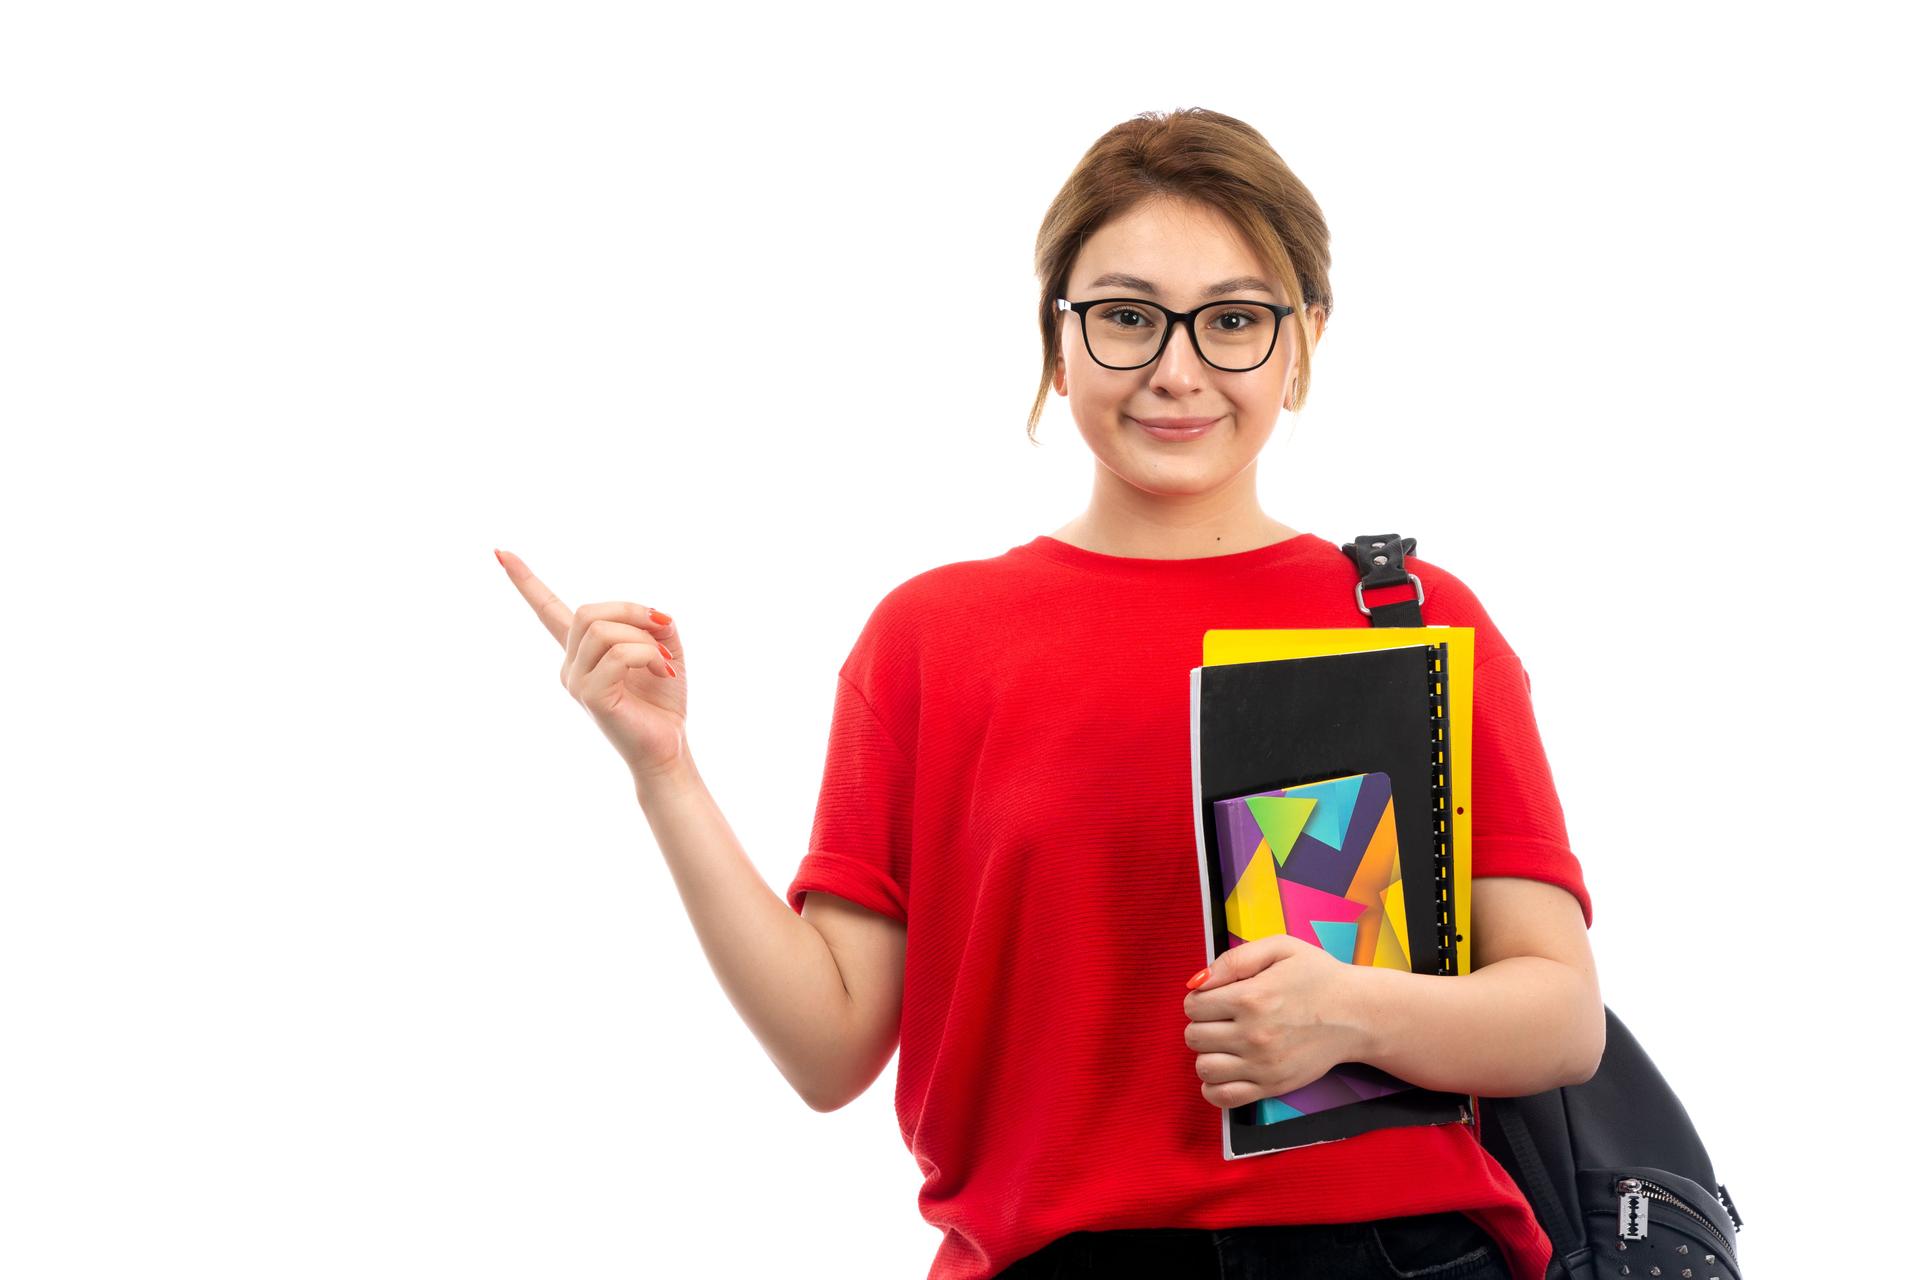 front-view-young-beautiful-lady-red-t-shirt-black-jeans-holding-different-copybooks-files-smiling-with-bag-white.jpg